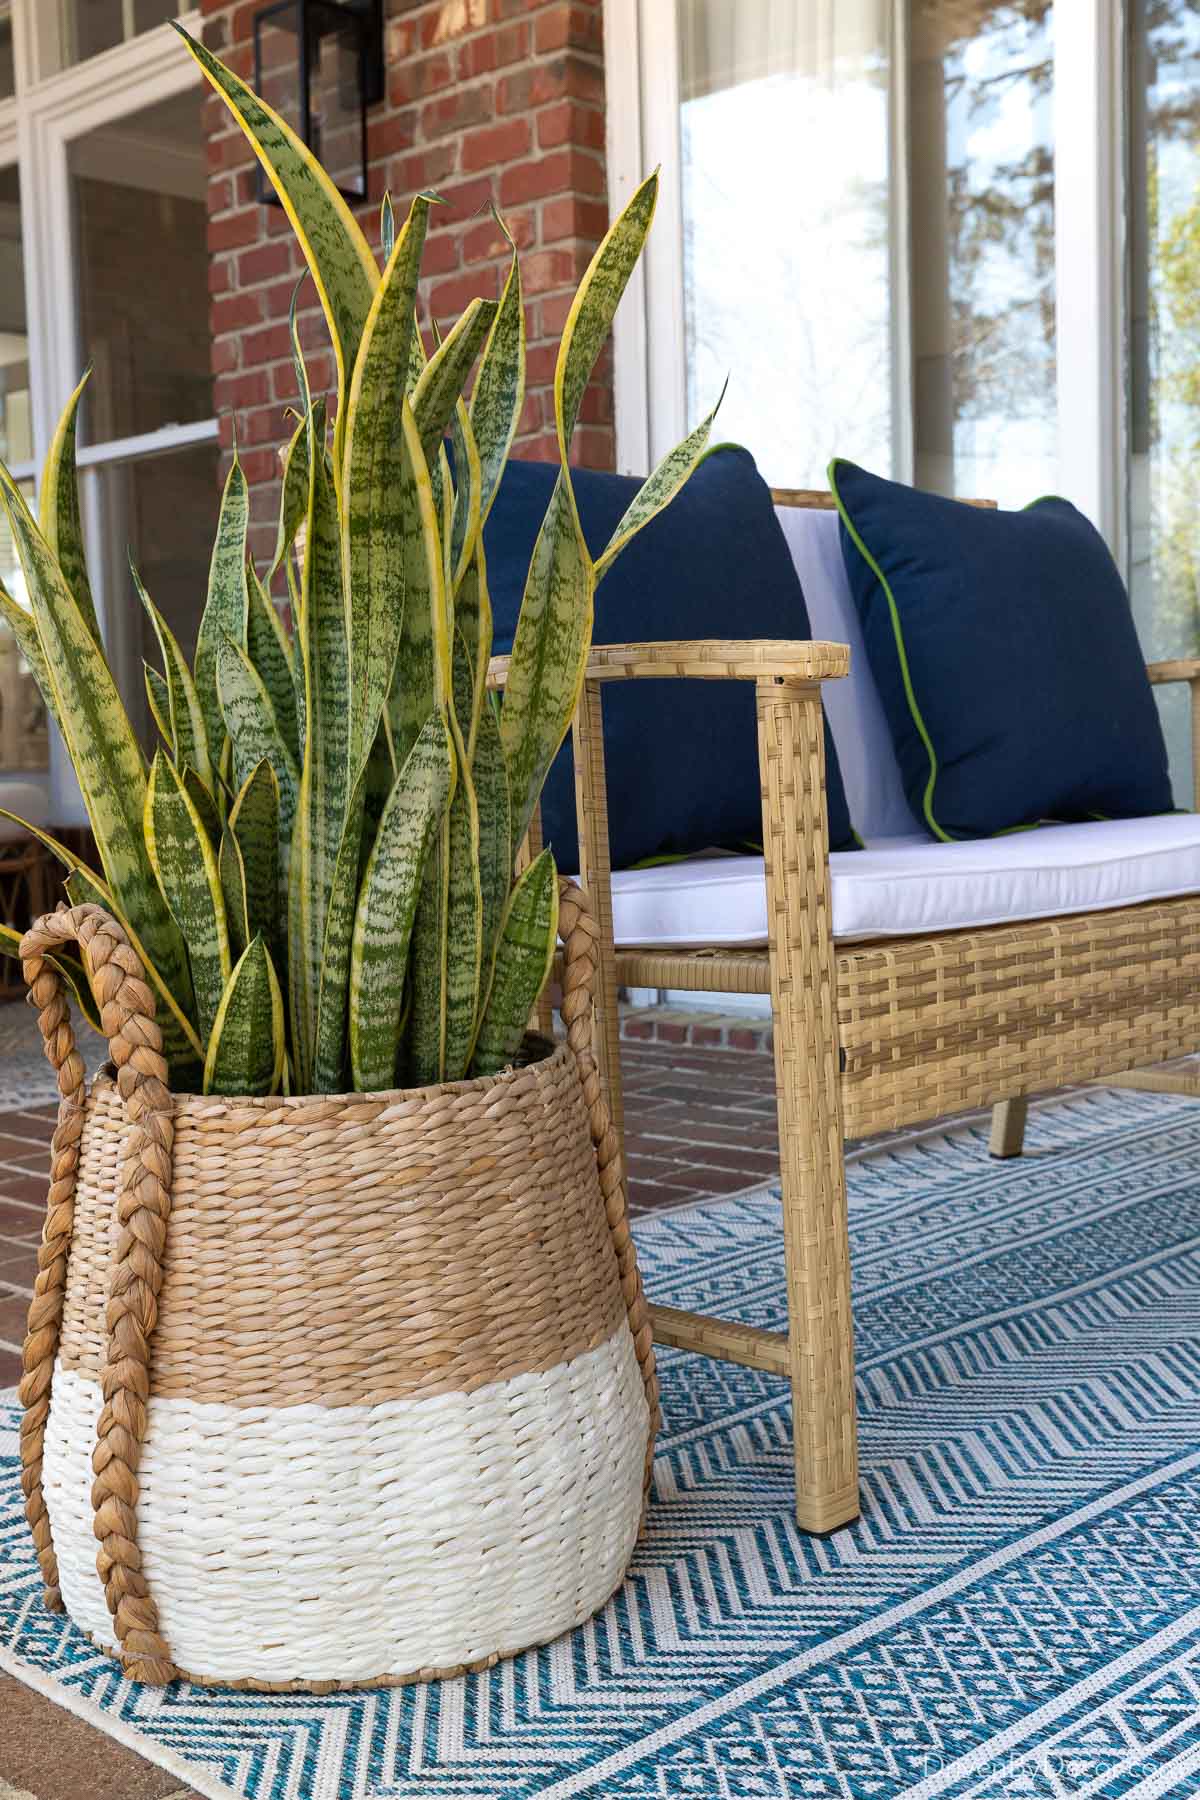 Snake plant in planter on back porch next to woven  loveseat